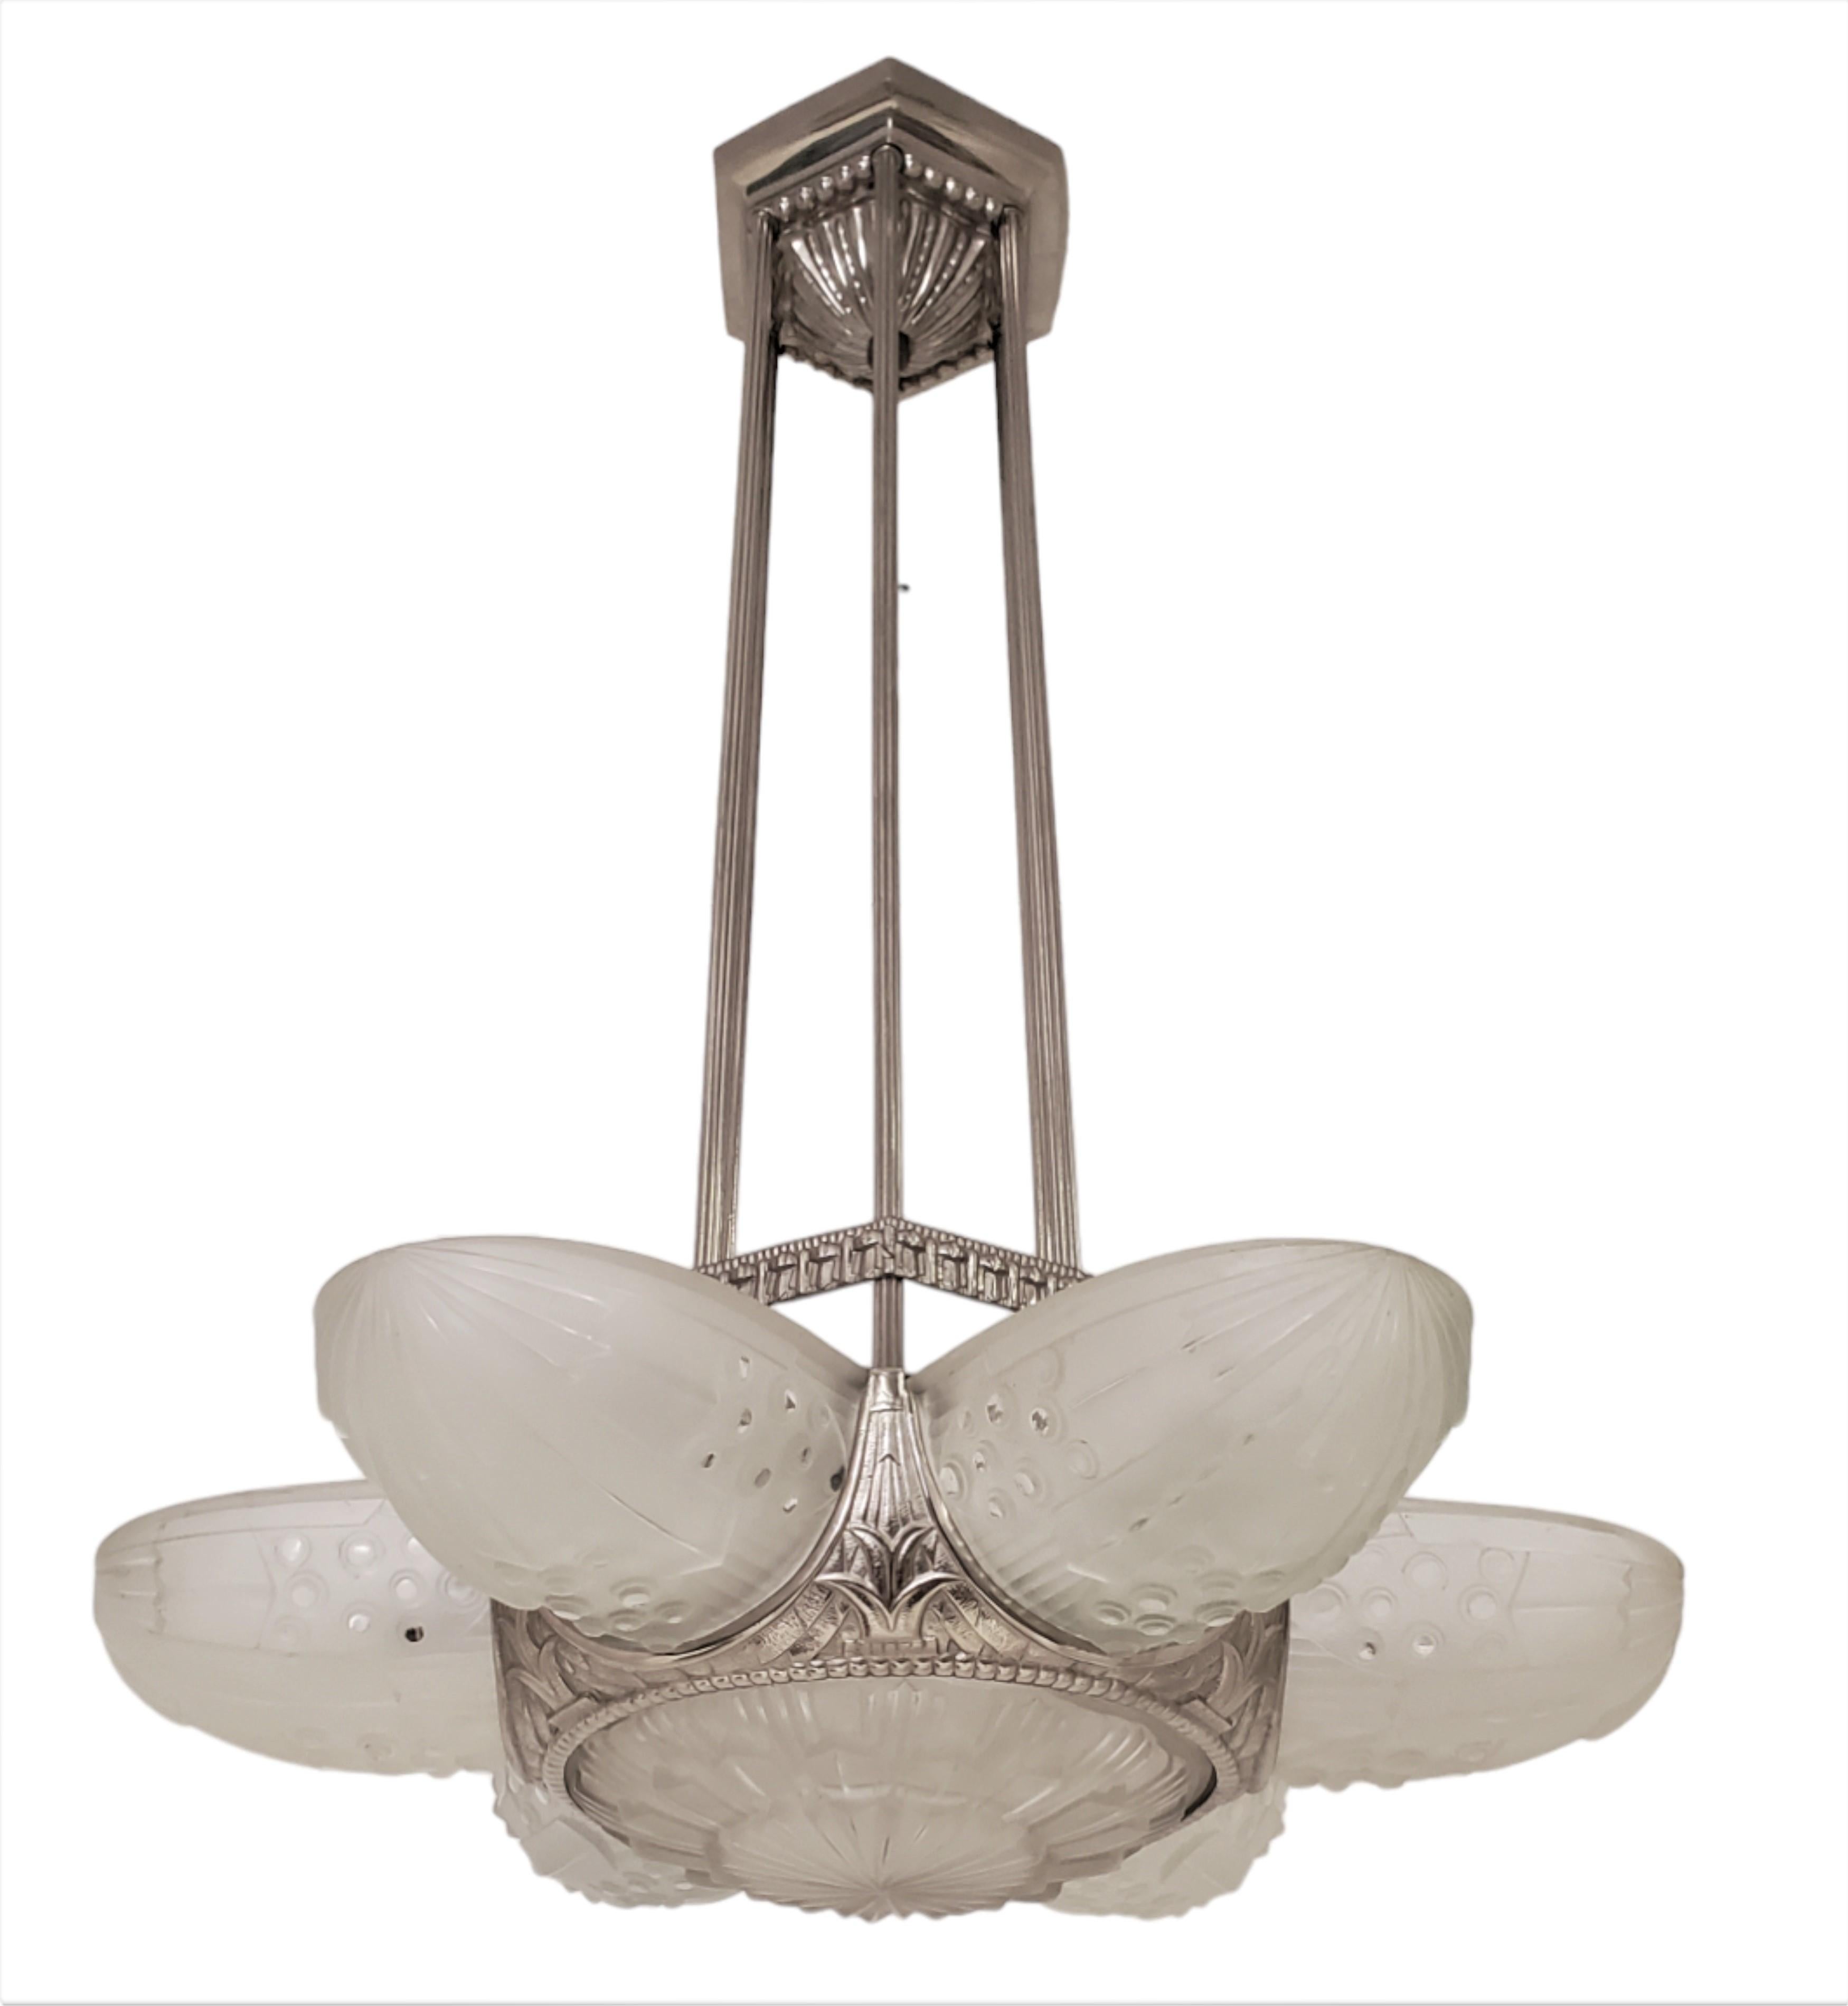 
Sleek and modern looking fine French Art Deco chandelier signed Leleu featuring six frosted art glass panels propelling outward of a central coupe.
The panels feature a starburst or floral blossom overall shape, supported by the original shiny